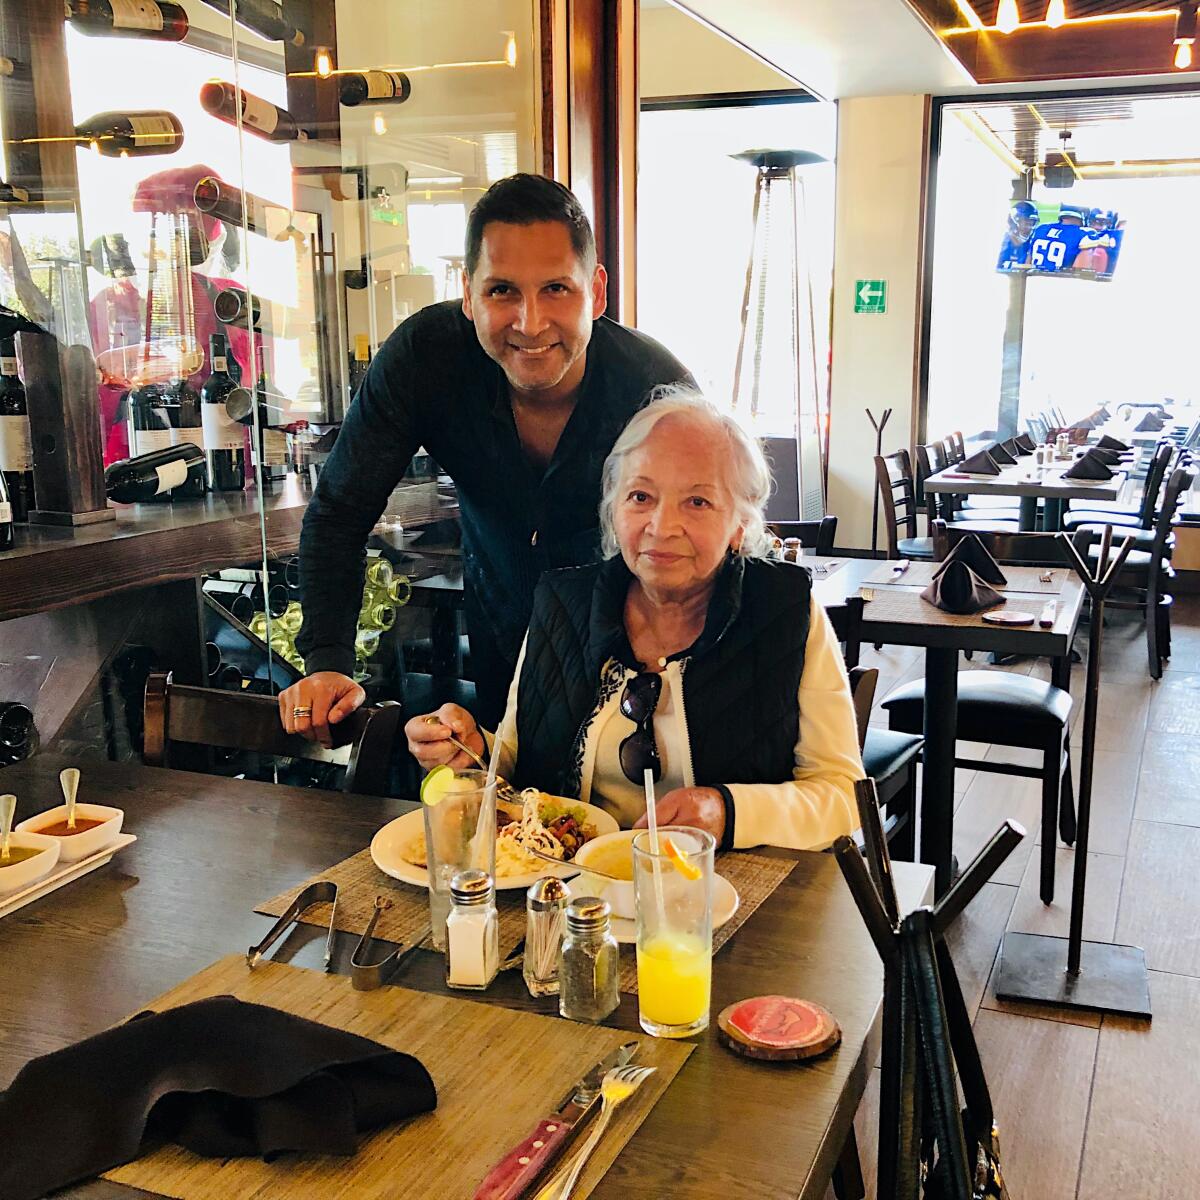 Renzzo Reyes, left, is pictured with his mother, Doris Orozco, at a restaurant.